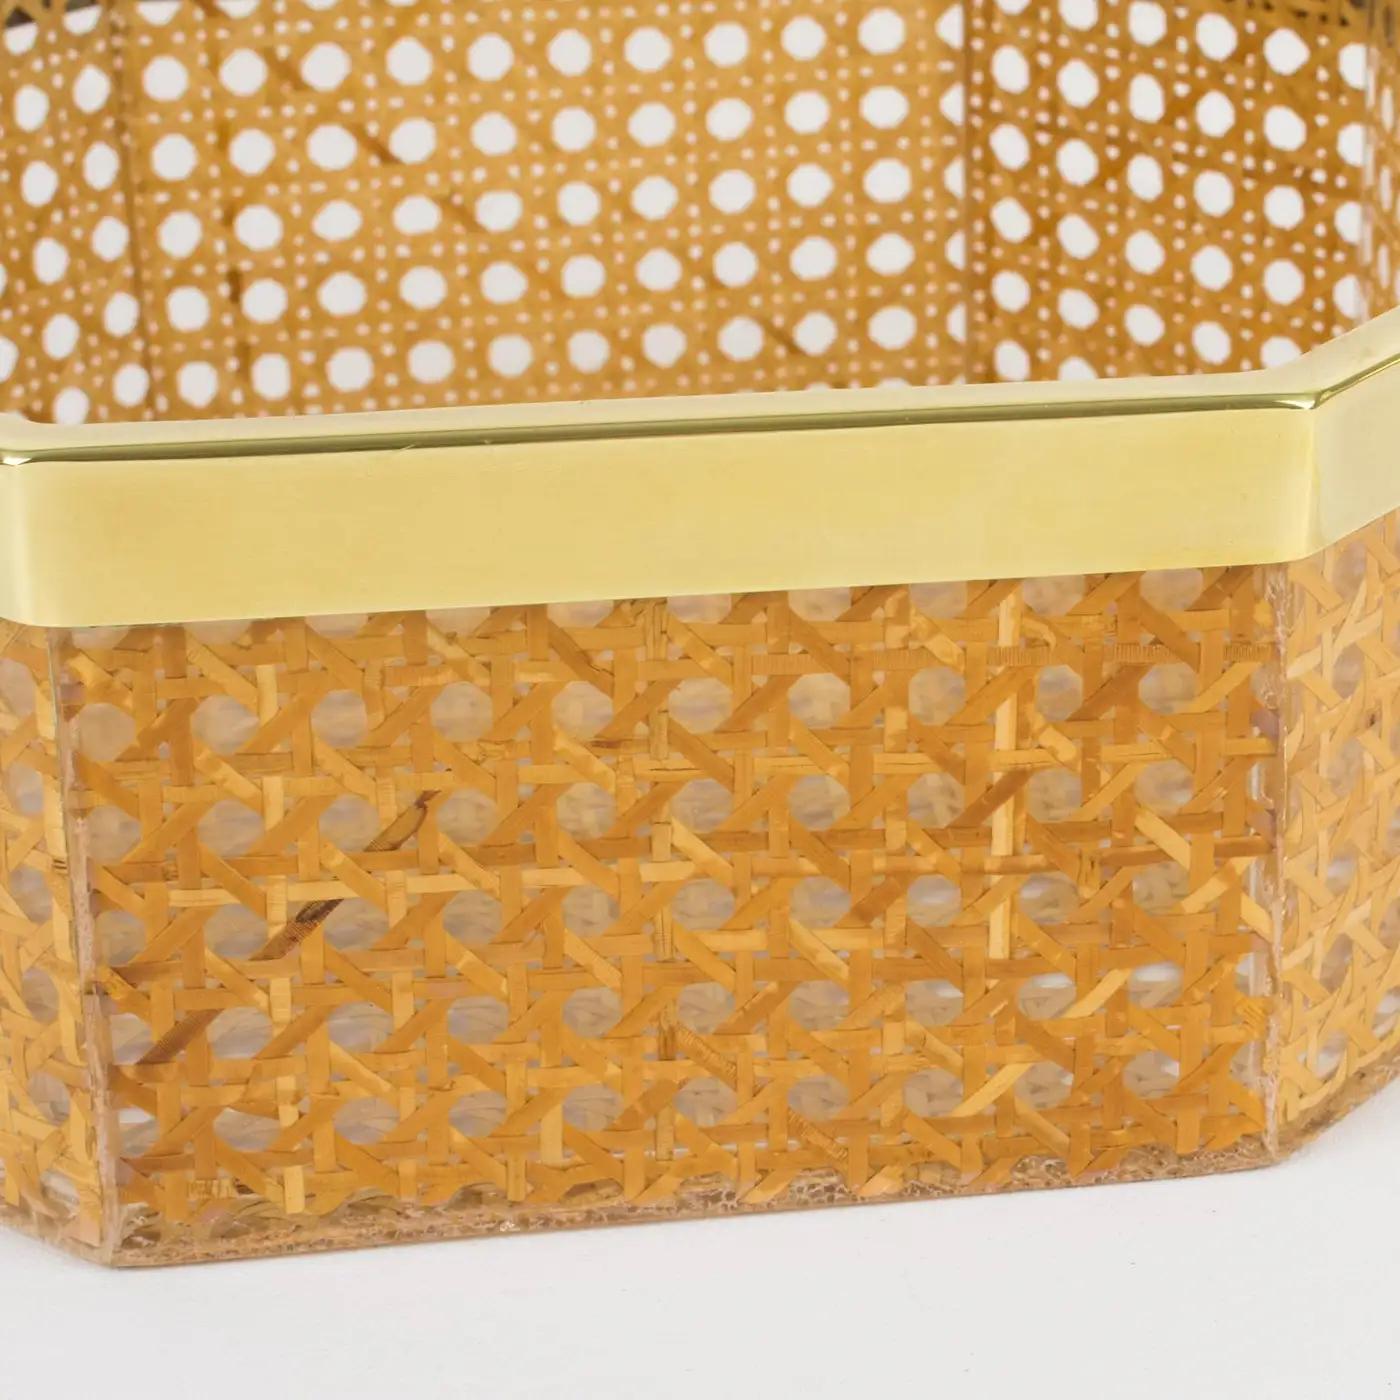 Christian Dior Home Lucite and Rattan Basket Bowl Centerpiece, 1970s For Sale 2